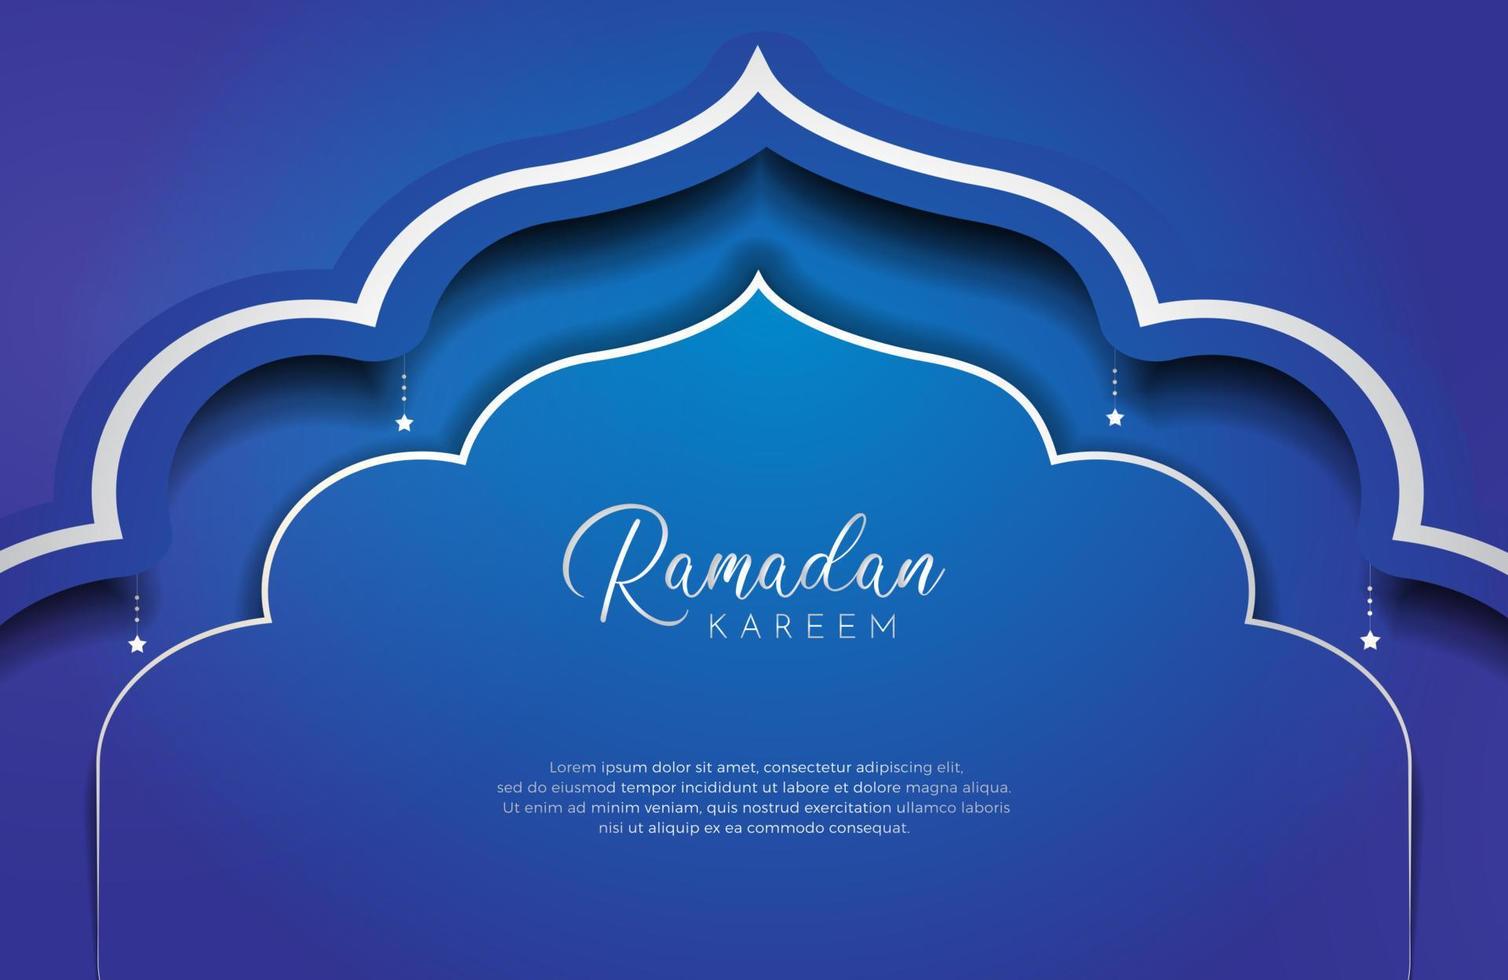 Ramadan Kareem background with white and blue color luxury style Vector illustration